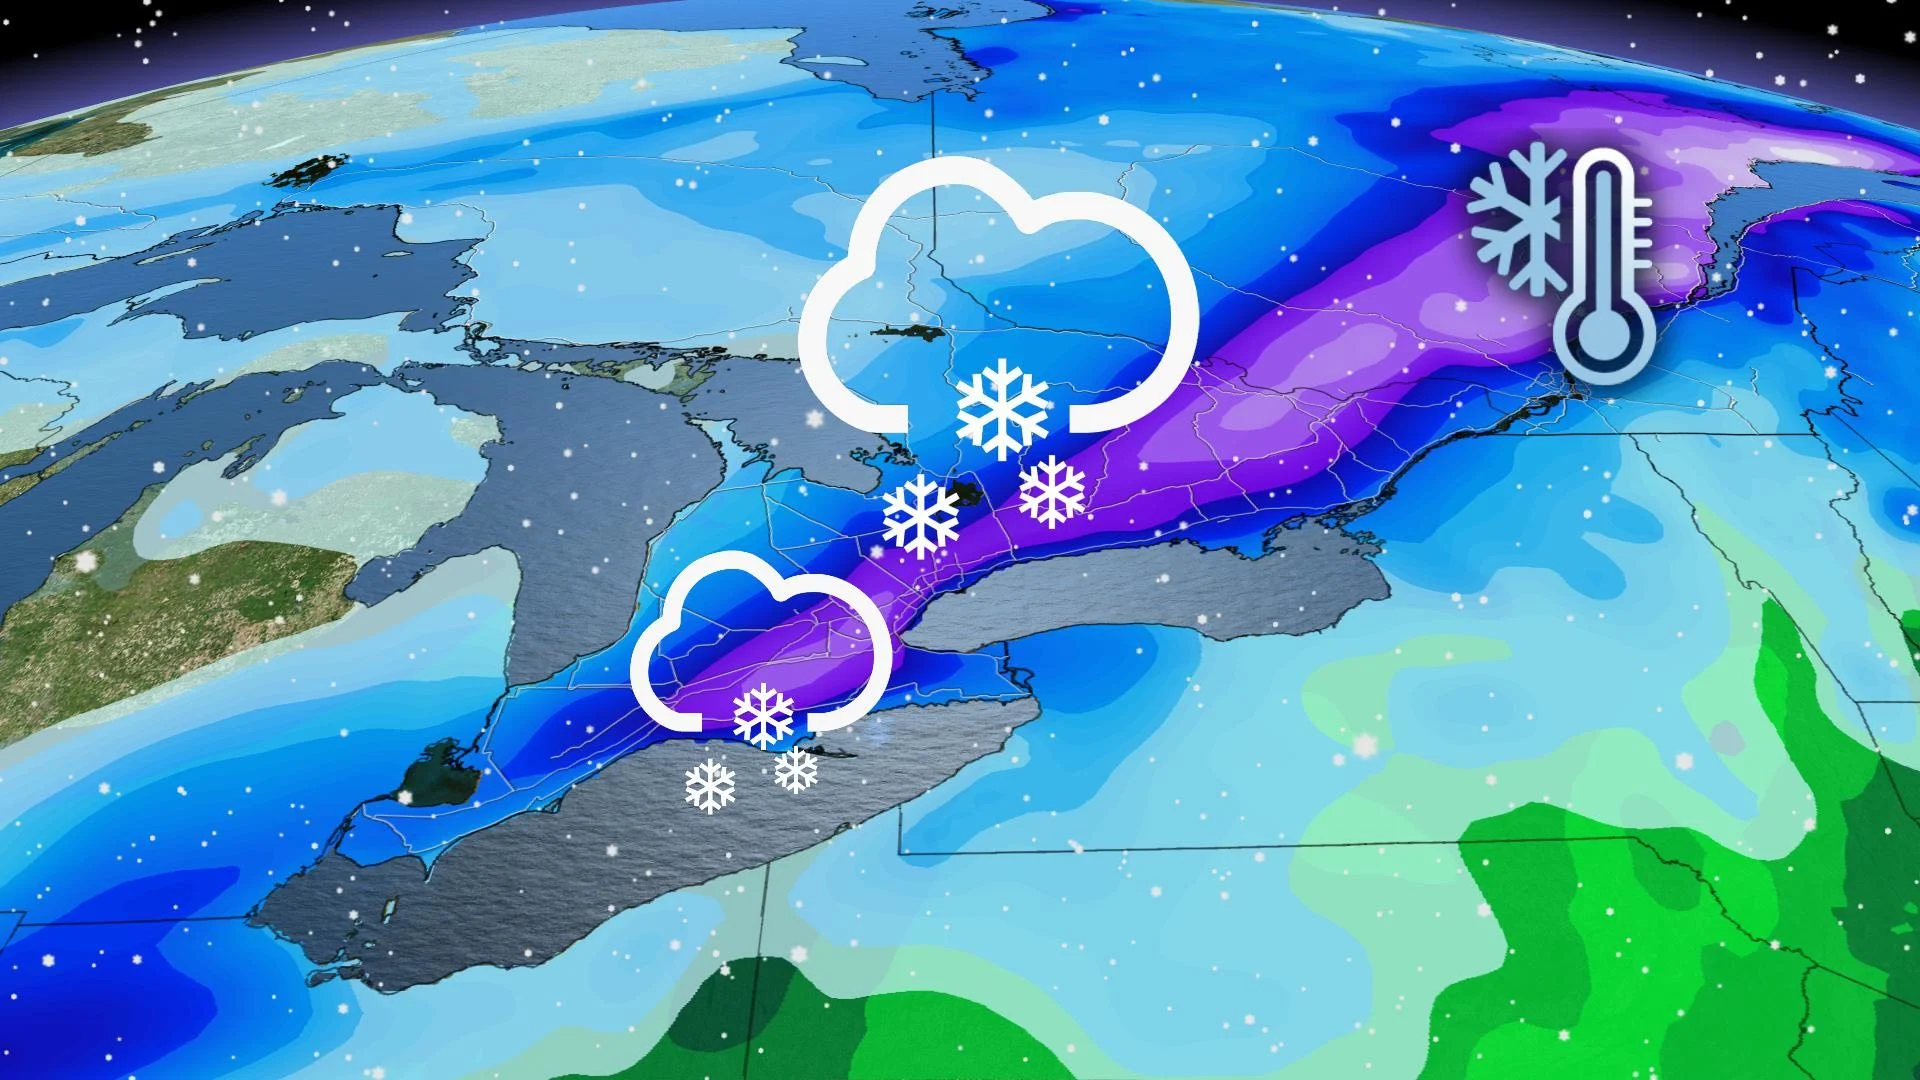 Hefty shot of 10-15 cm of snow likely to impact travel in Ontario